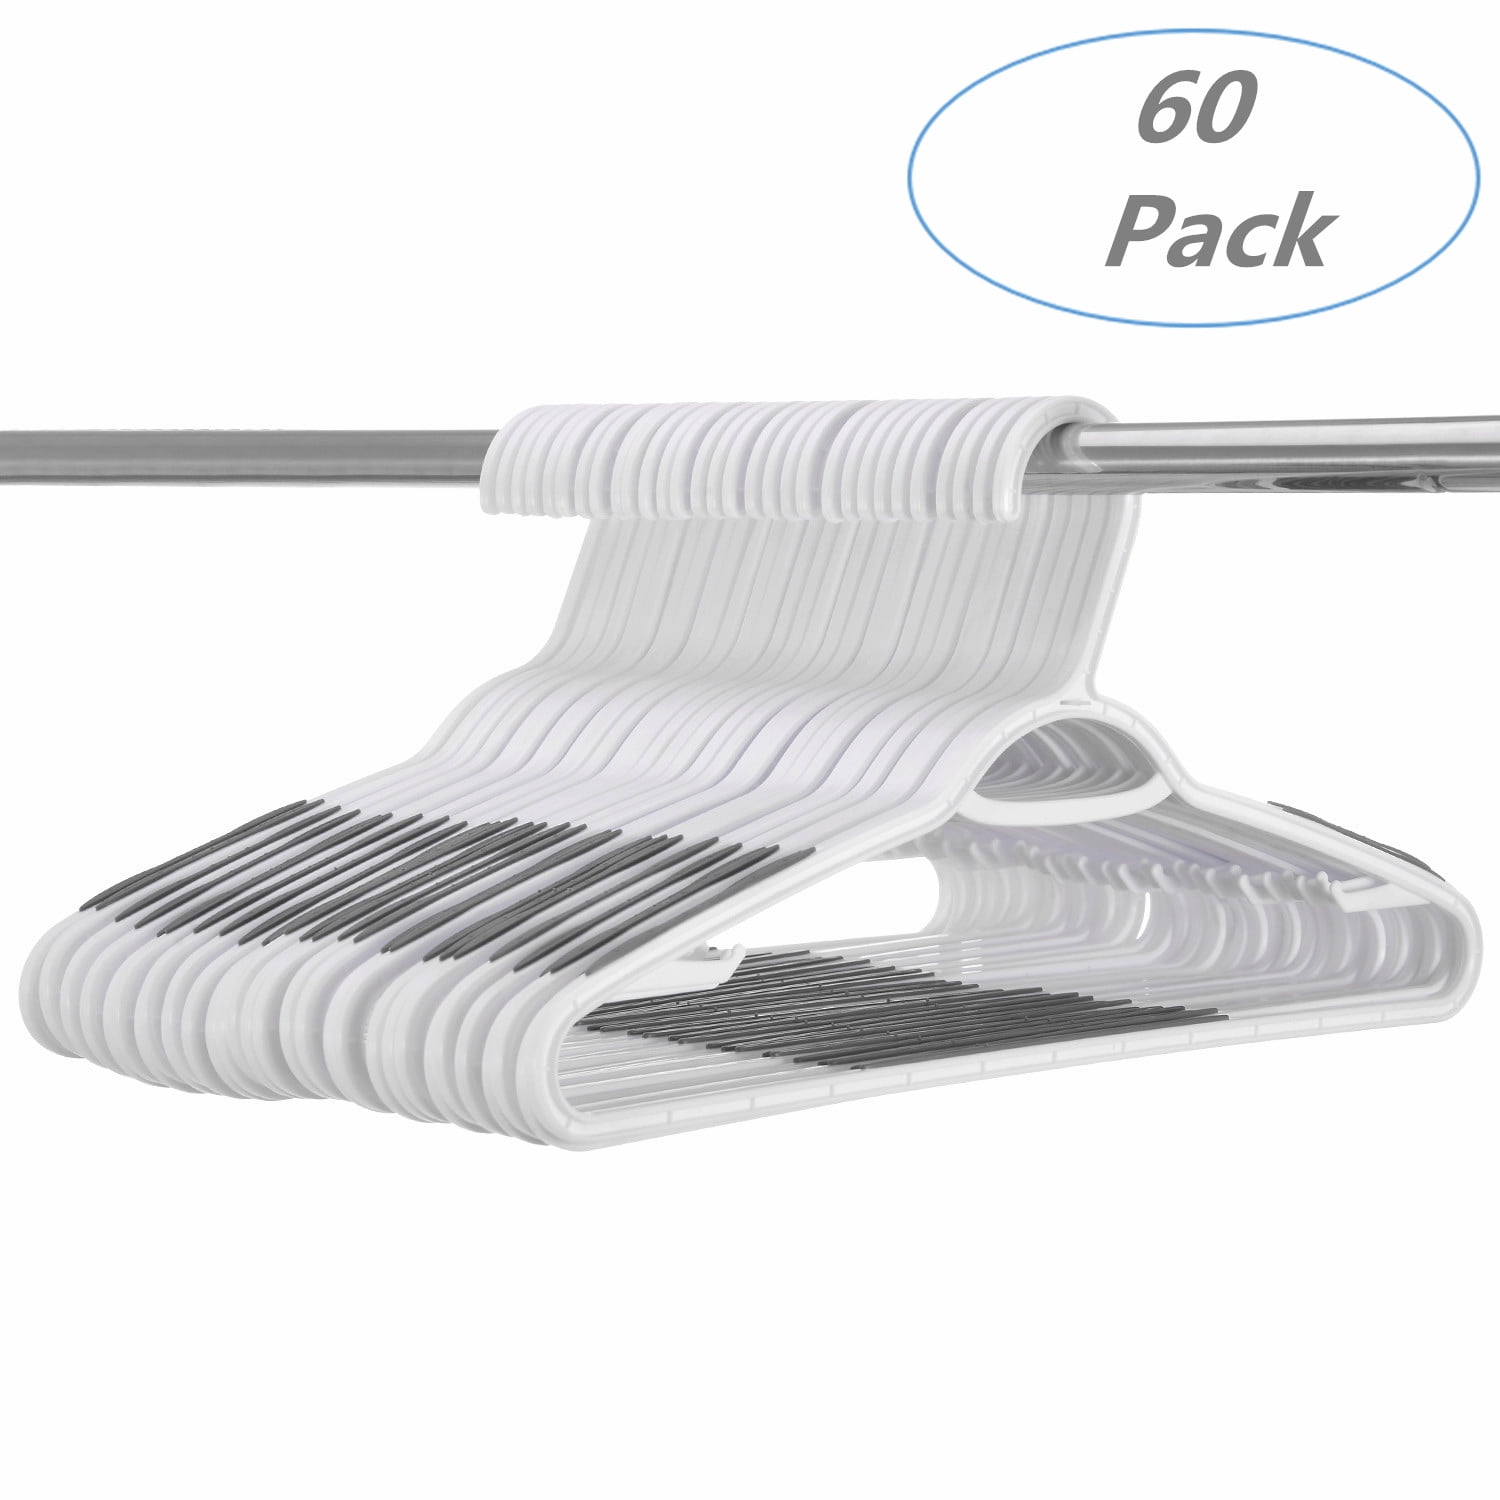 The Hanger Store™ Strong Heavy Duty Plastic Adult Coat Hangers with Trouser Bar 